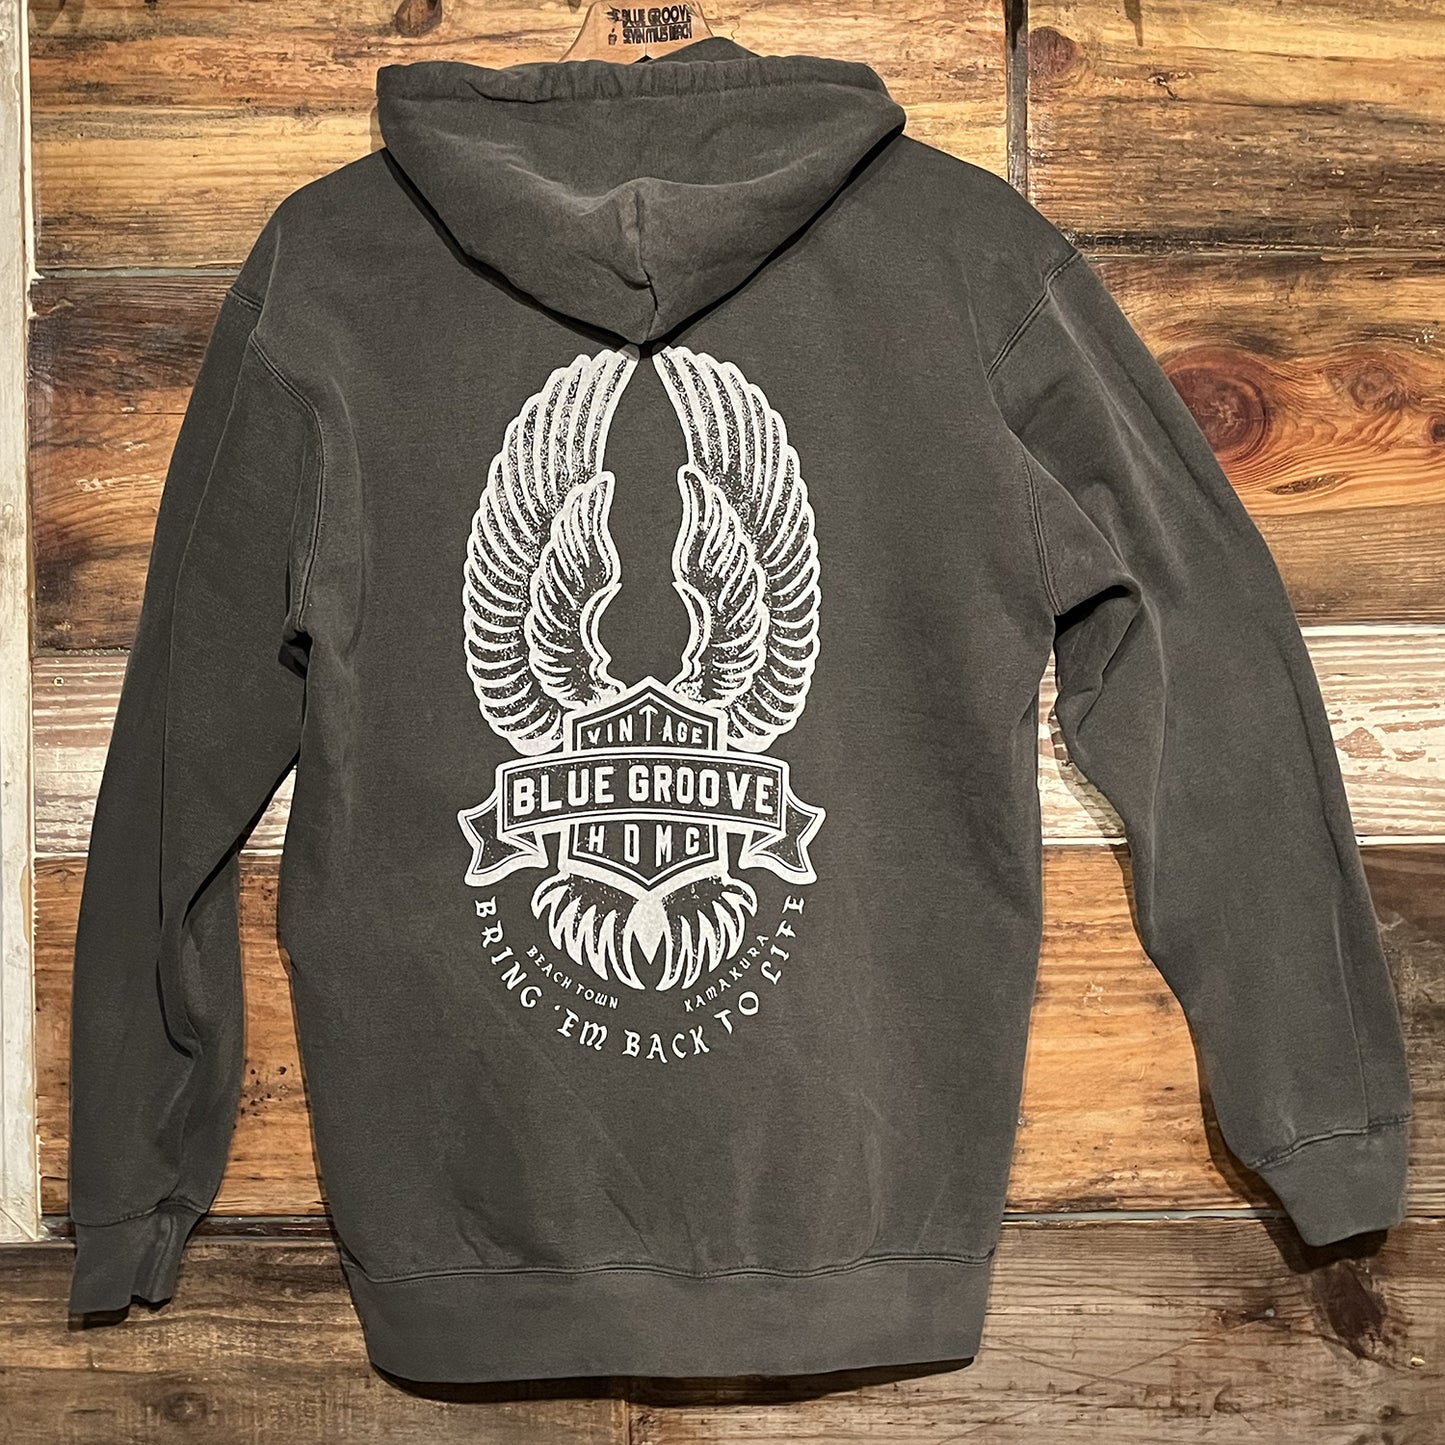 “BRING ‘EM BACK TO LIFE” PULL-OVER HOODIE - PEPPER